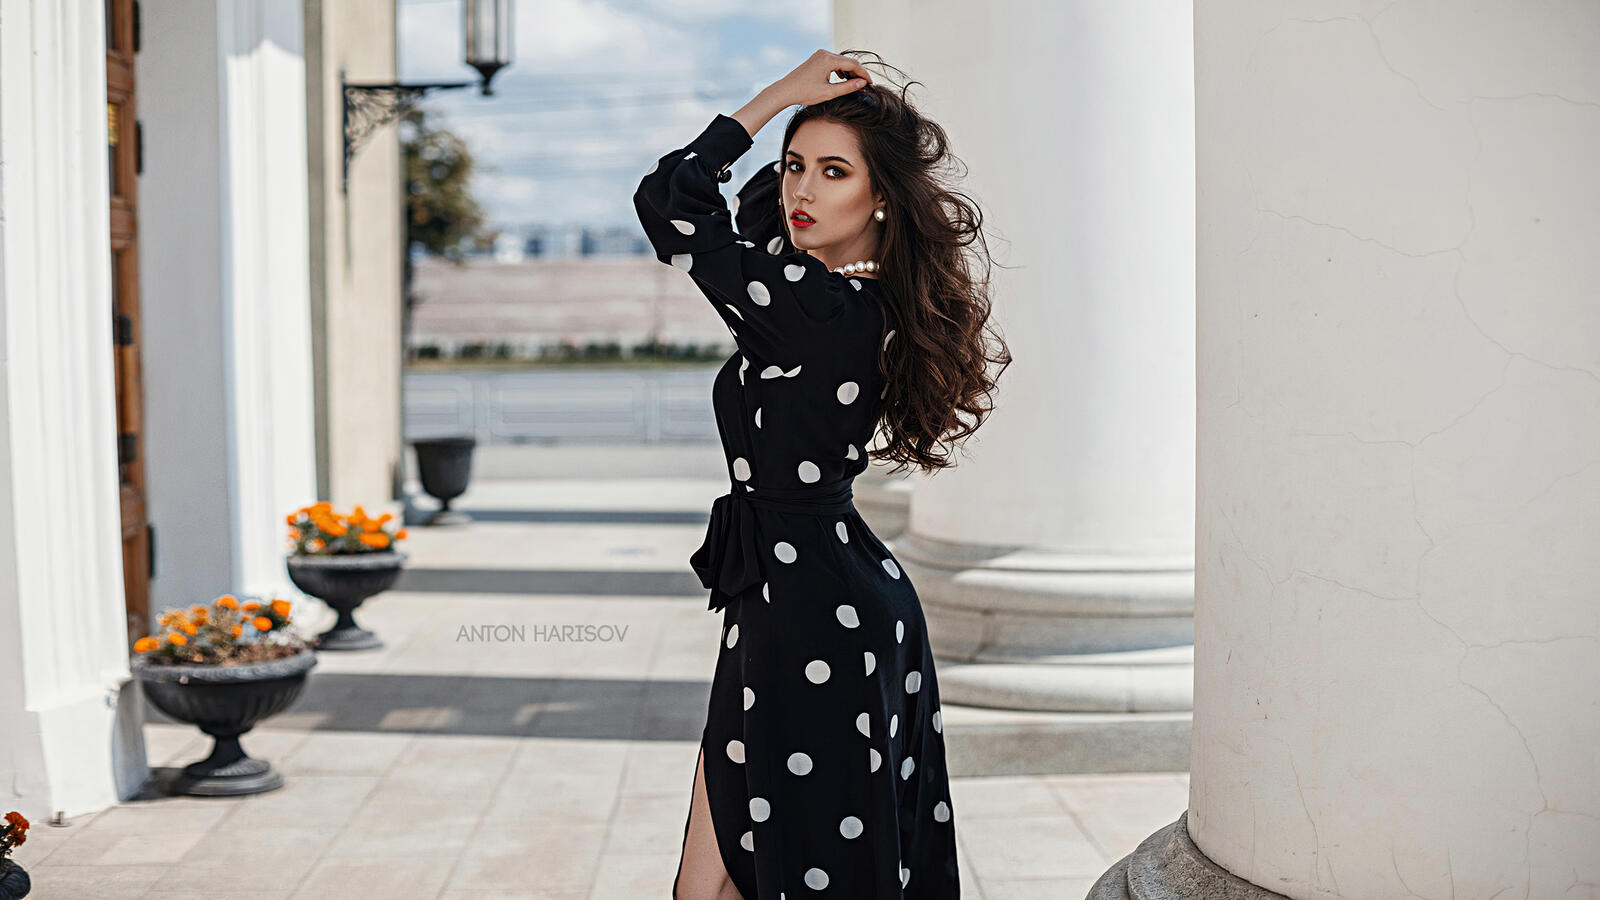 Free photo Dark-haired girl in a black dress with white polka dots